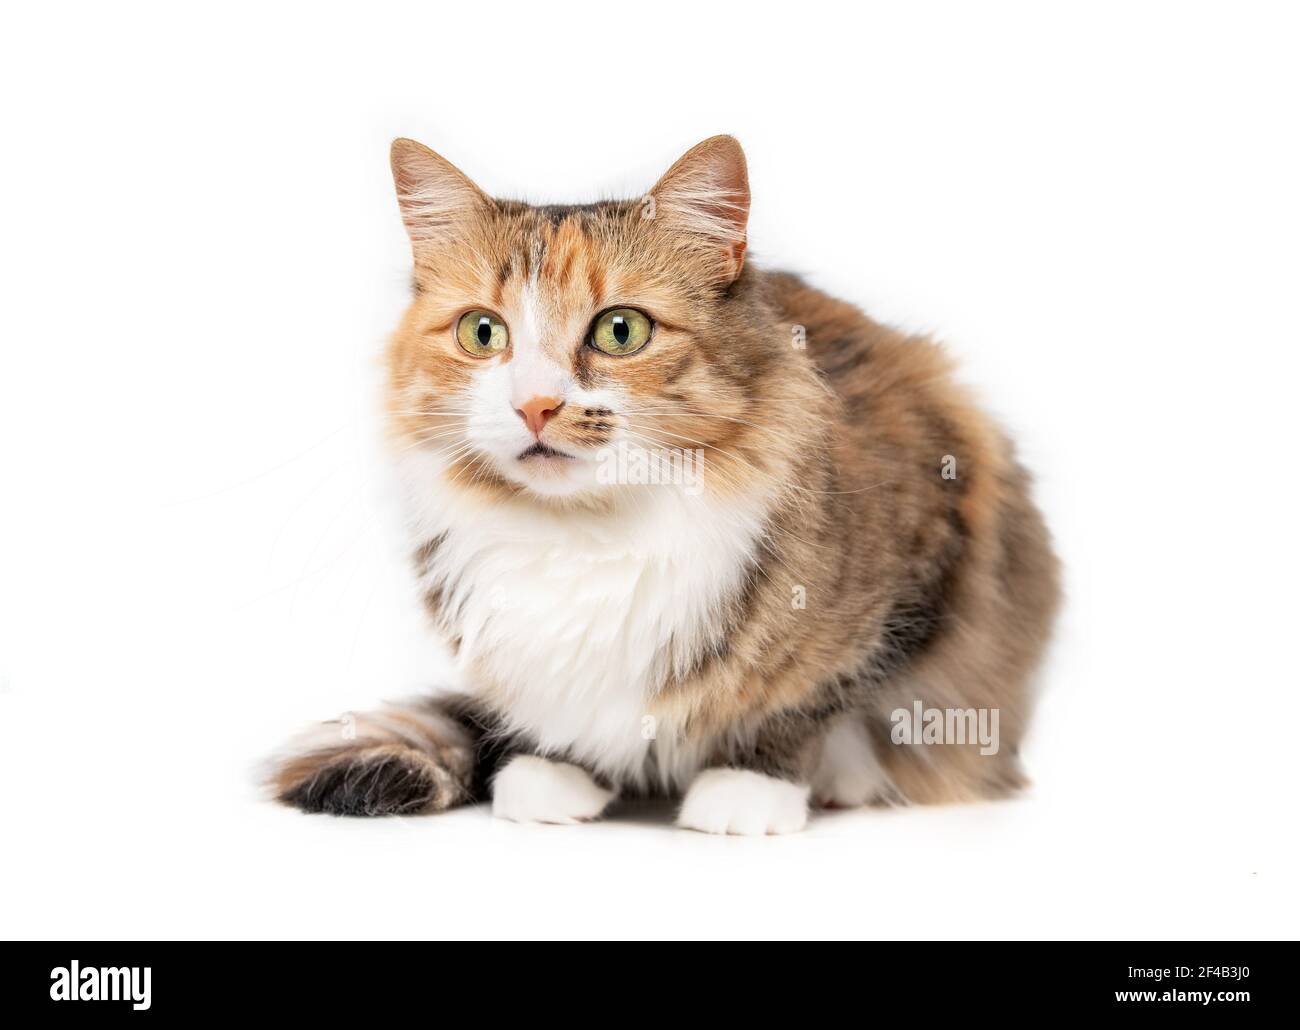 Cat crouching with legs tucked under body, looking interested. Cute full body portrait of female torbie kitty with beautiful asymmetric markings. Sele Stock Photo